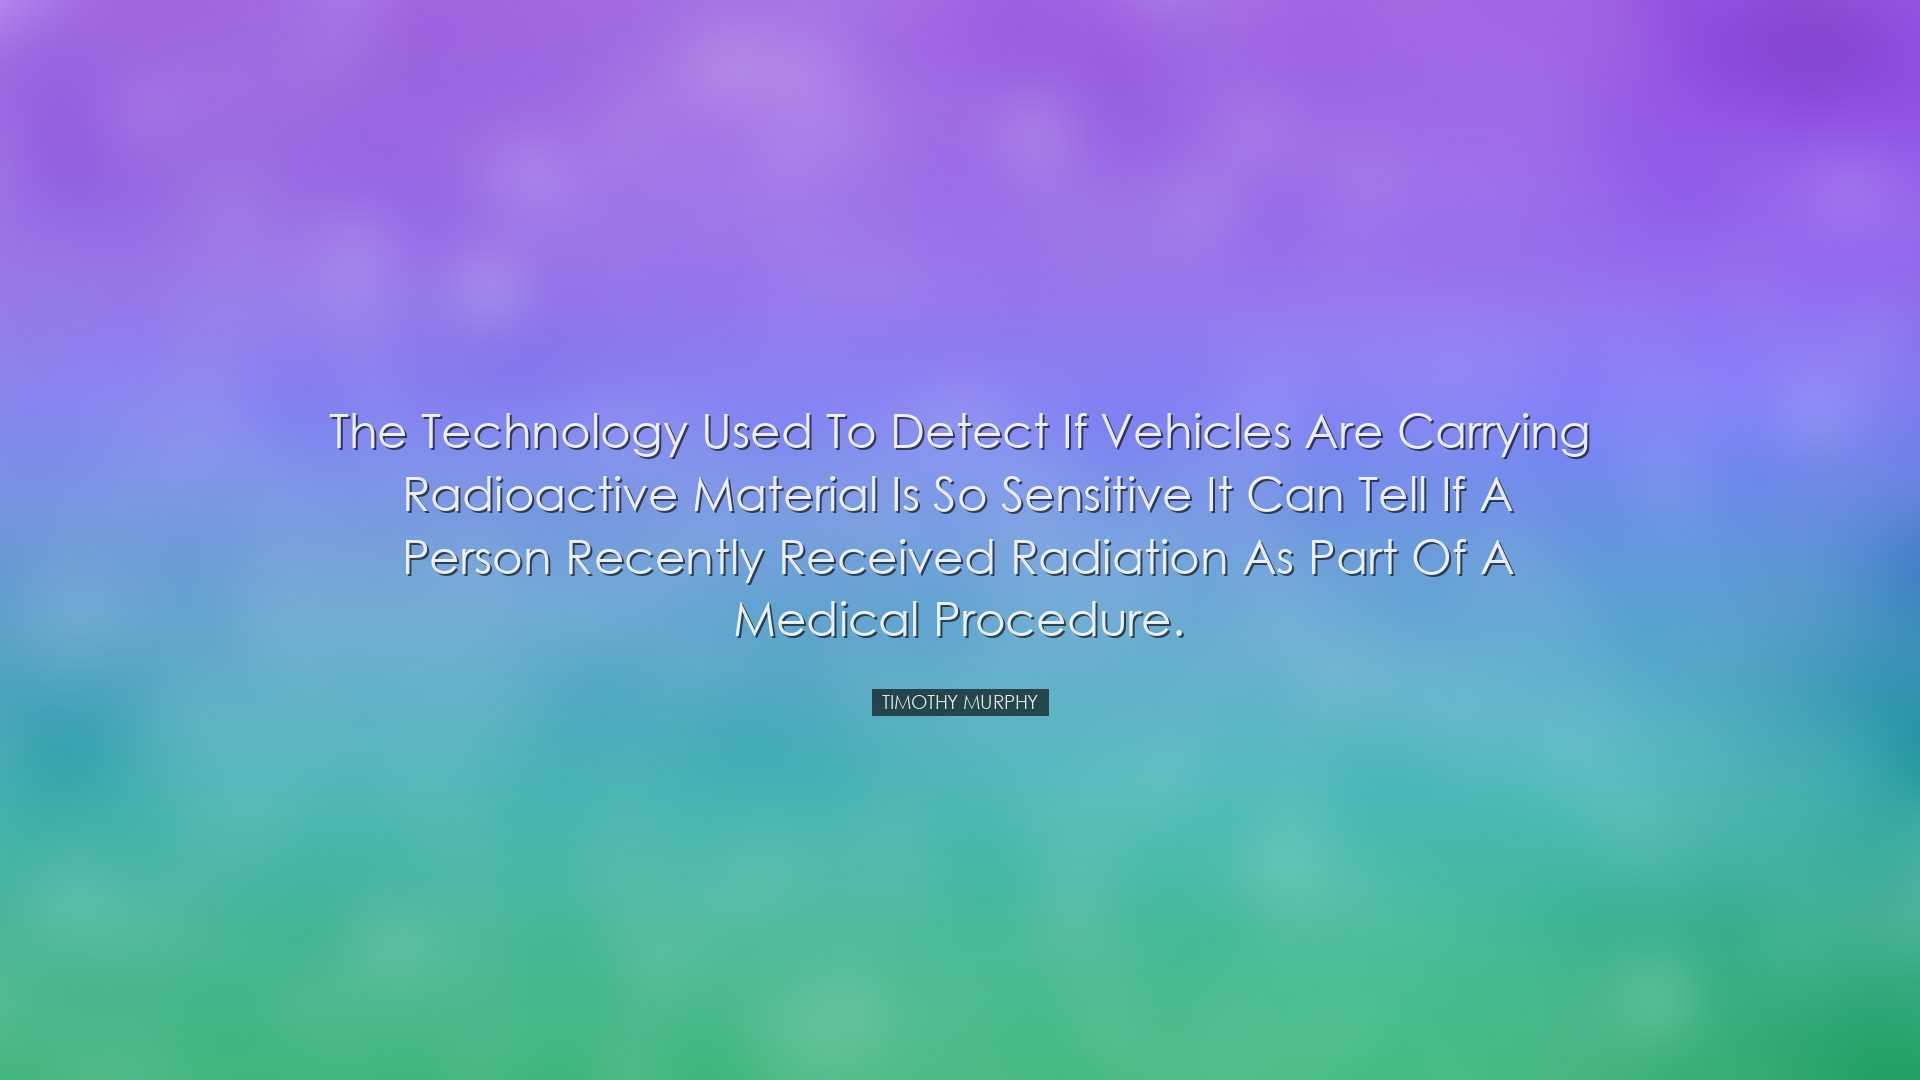 The technology used to detect if vehicles are carrying radioactive